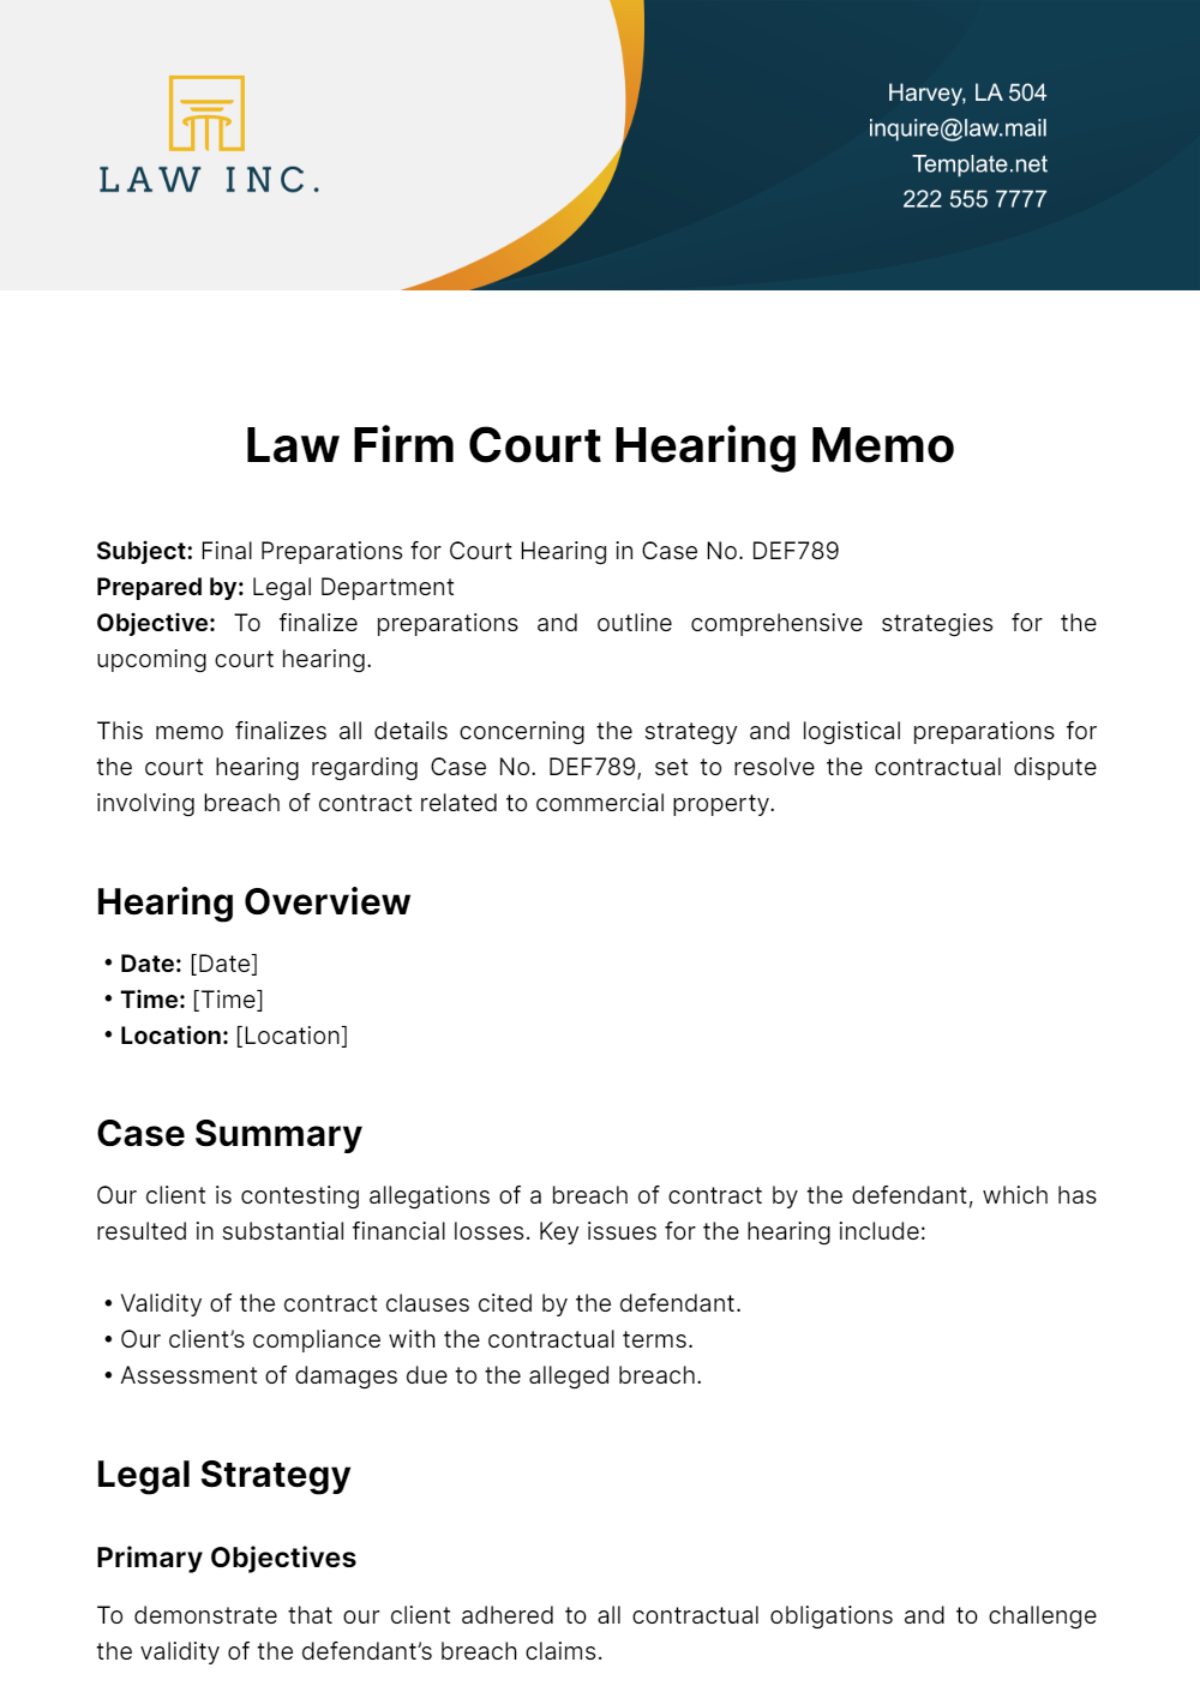 Free Law Firm Court Hearing Memo Template